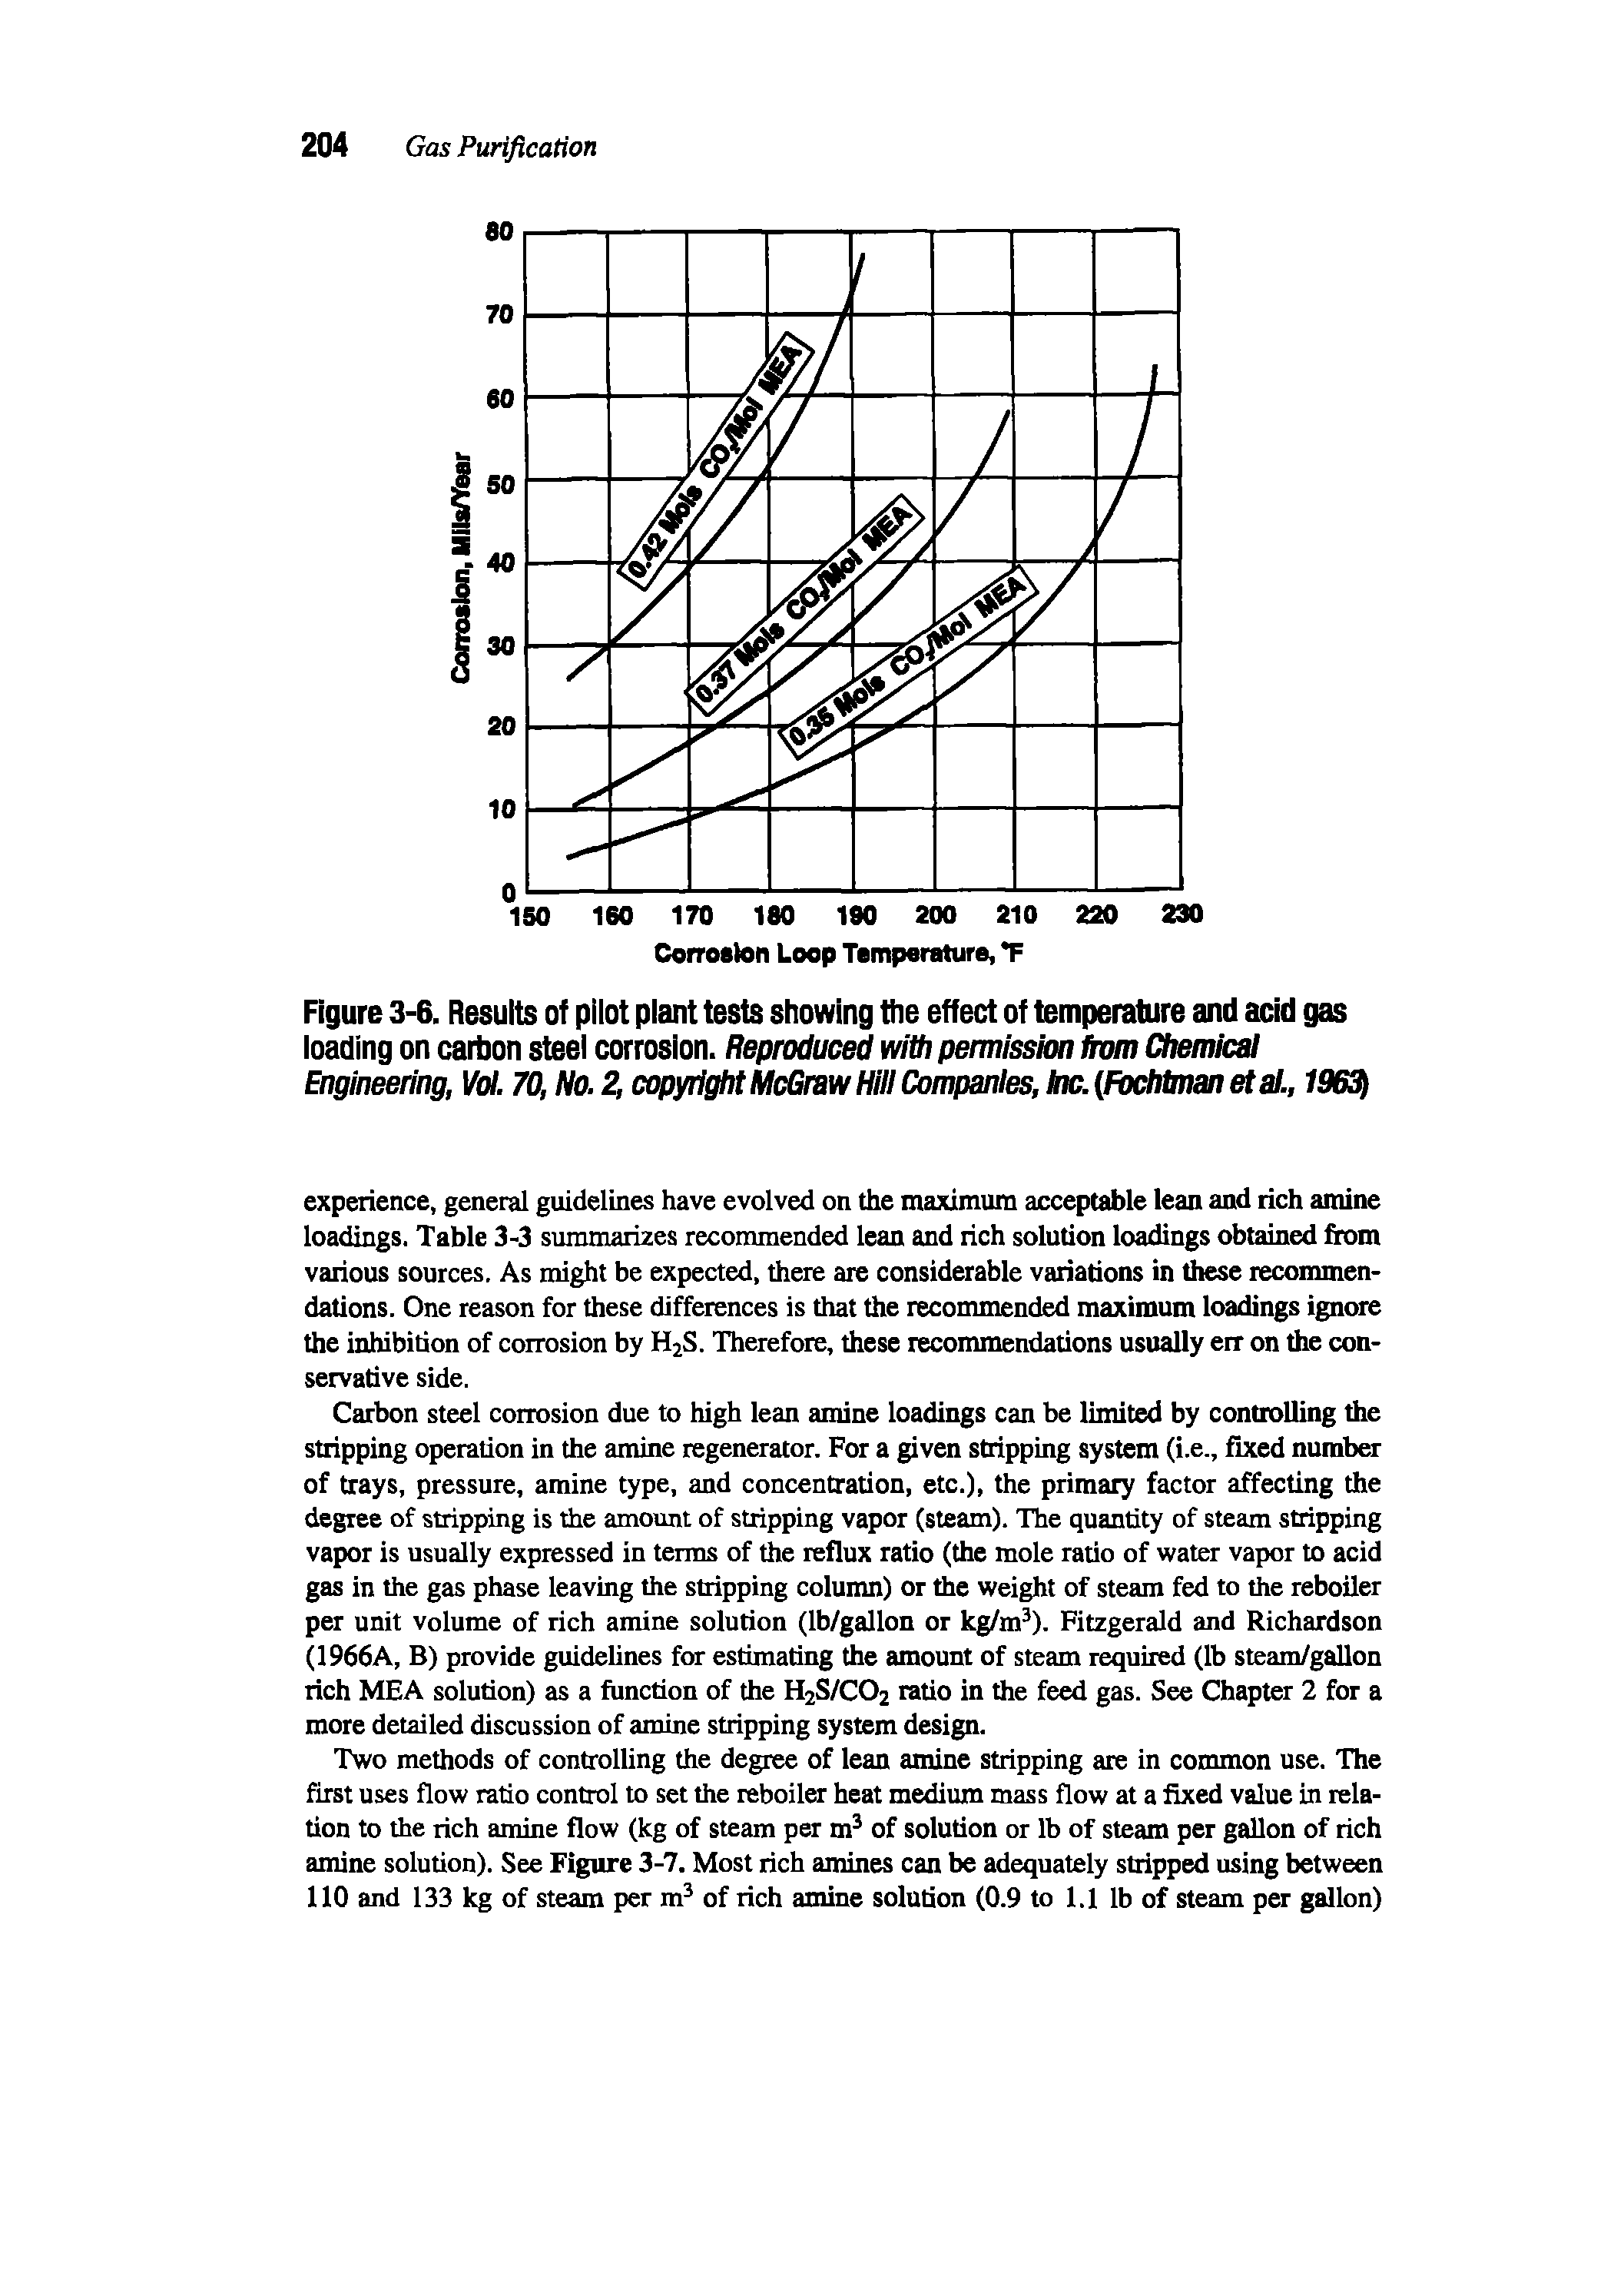 Figure 3-6. Results of pilot plant tests showing the effect of temperature and add gas loading on carbon steel corrosion. Reproduced with permission hm Chemical Engineering, Vd. 70, No. 2, copyright McGrawHiii(k)mpanles,lnc. FocldmanetaL, 196 ...